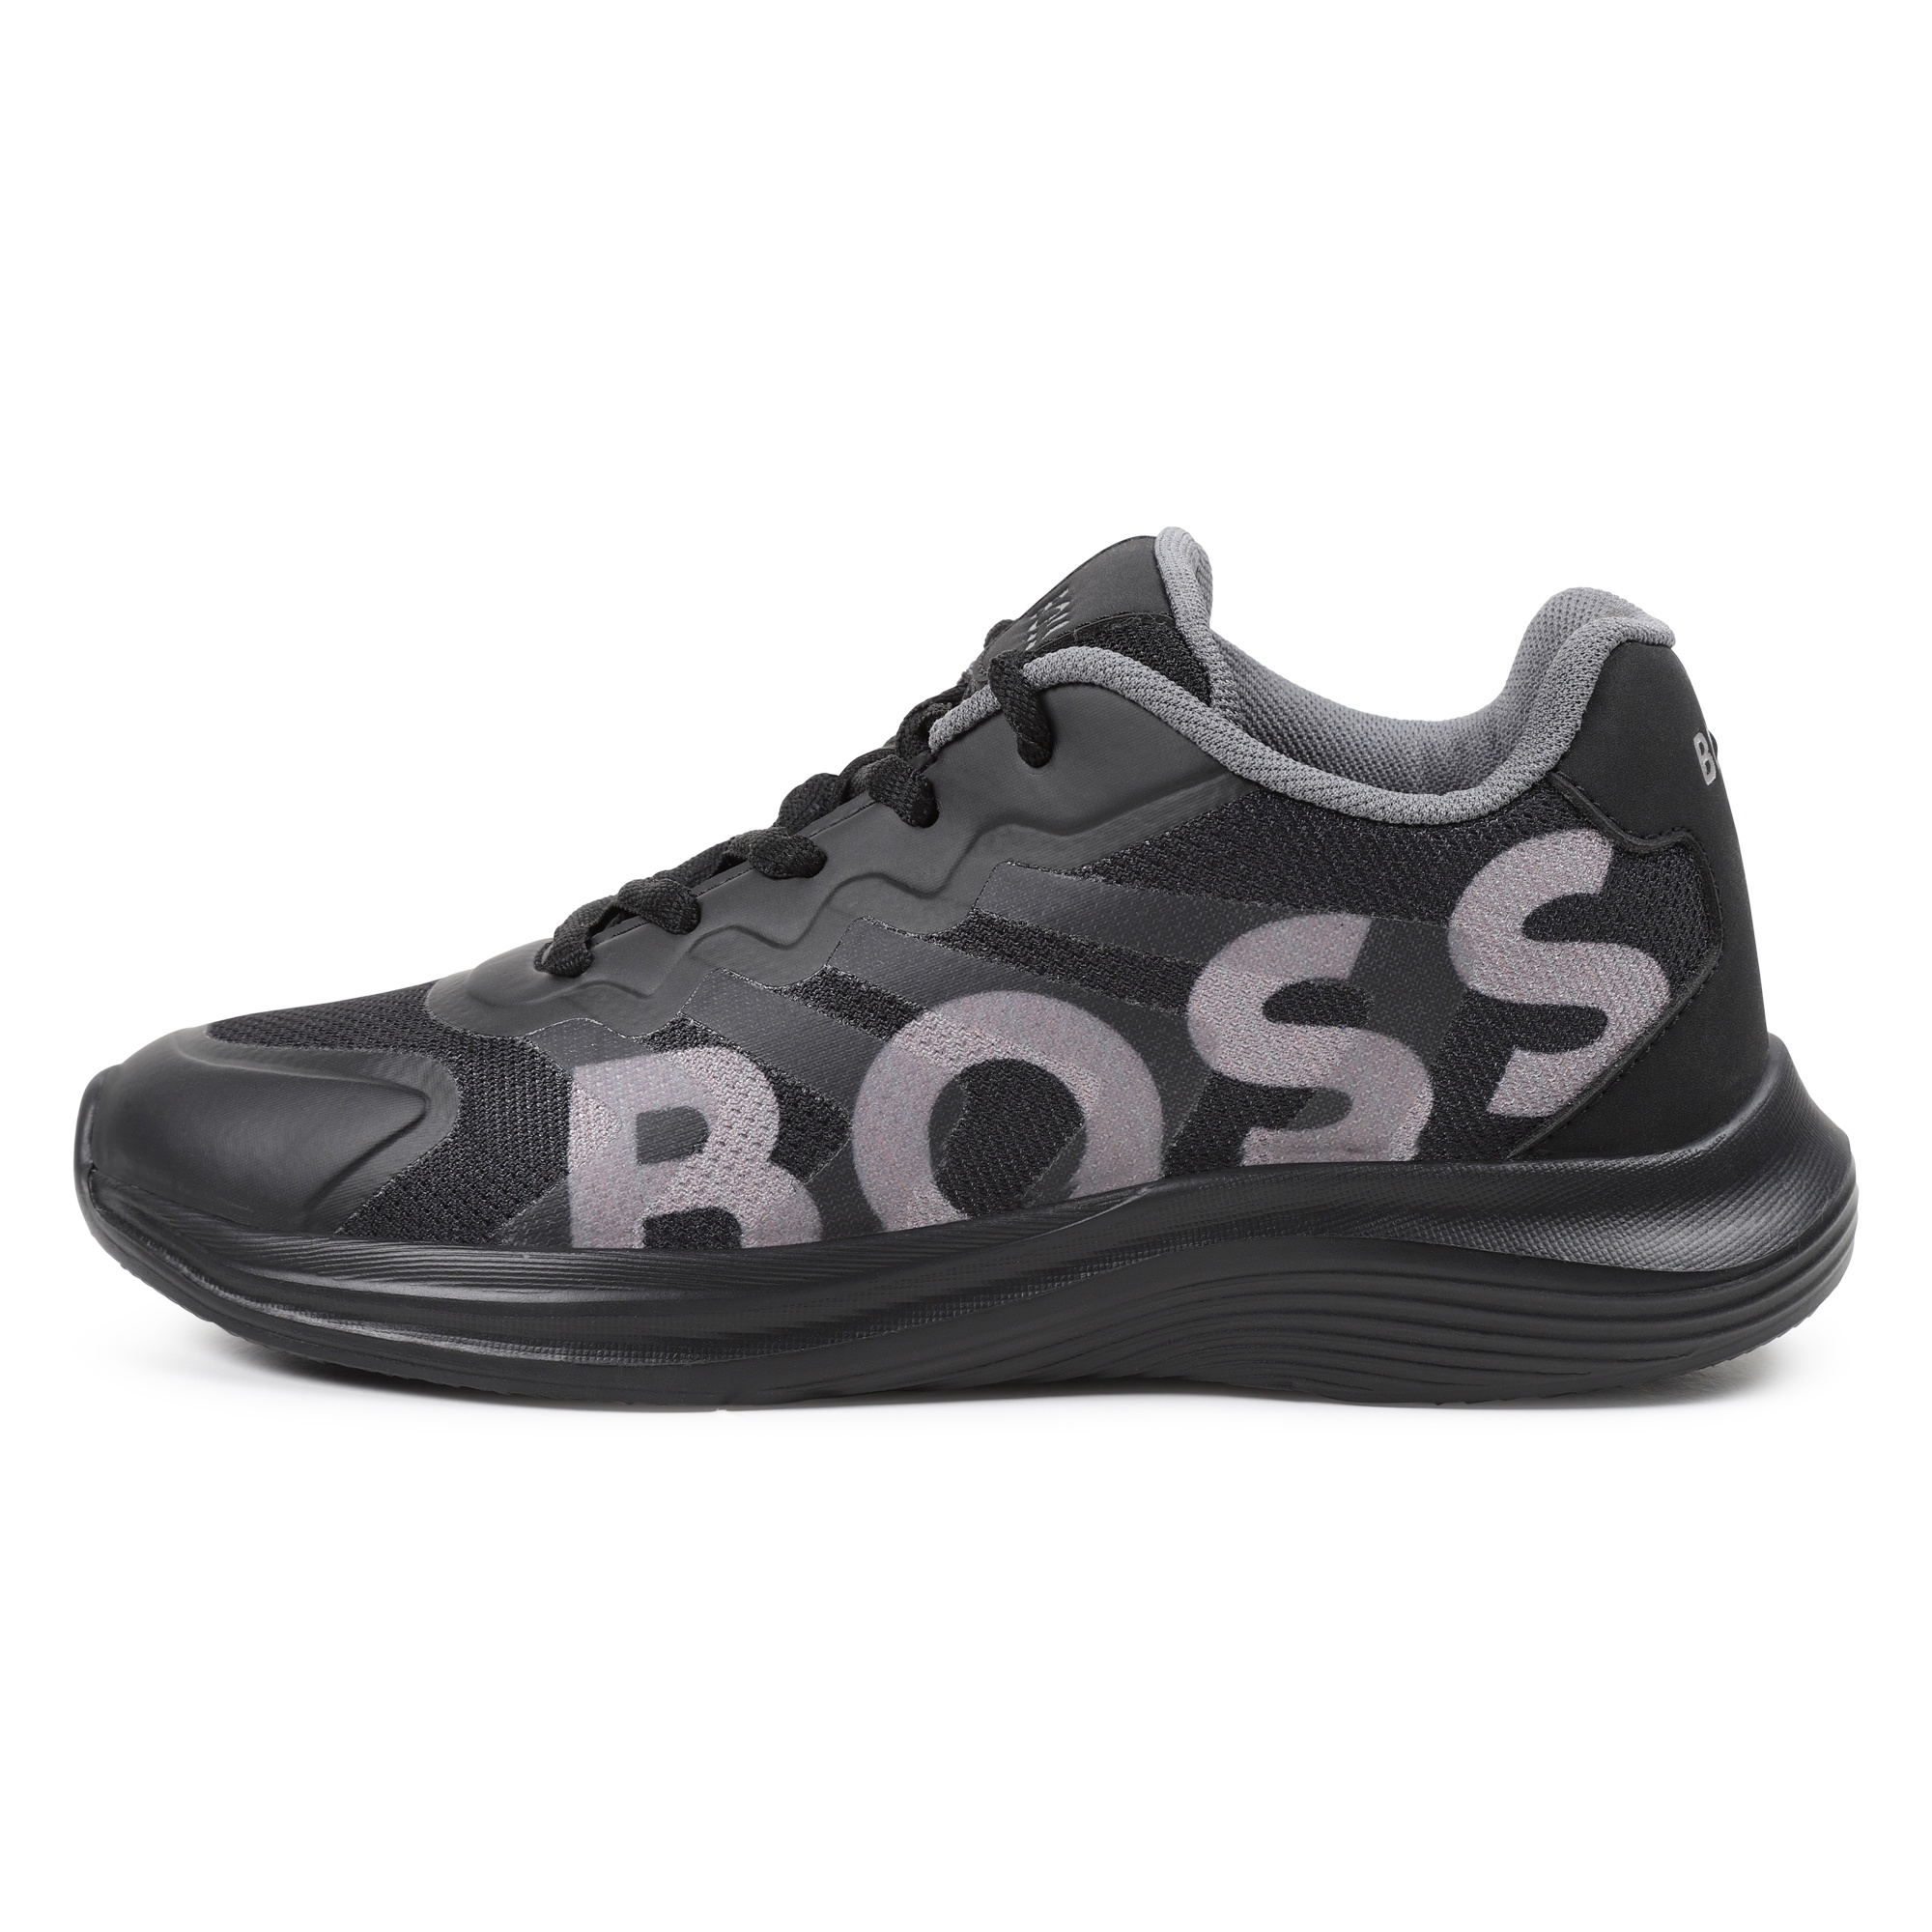 Bi-material lace-up trainers BOSS for BOY